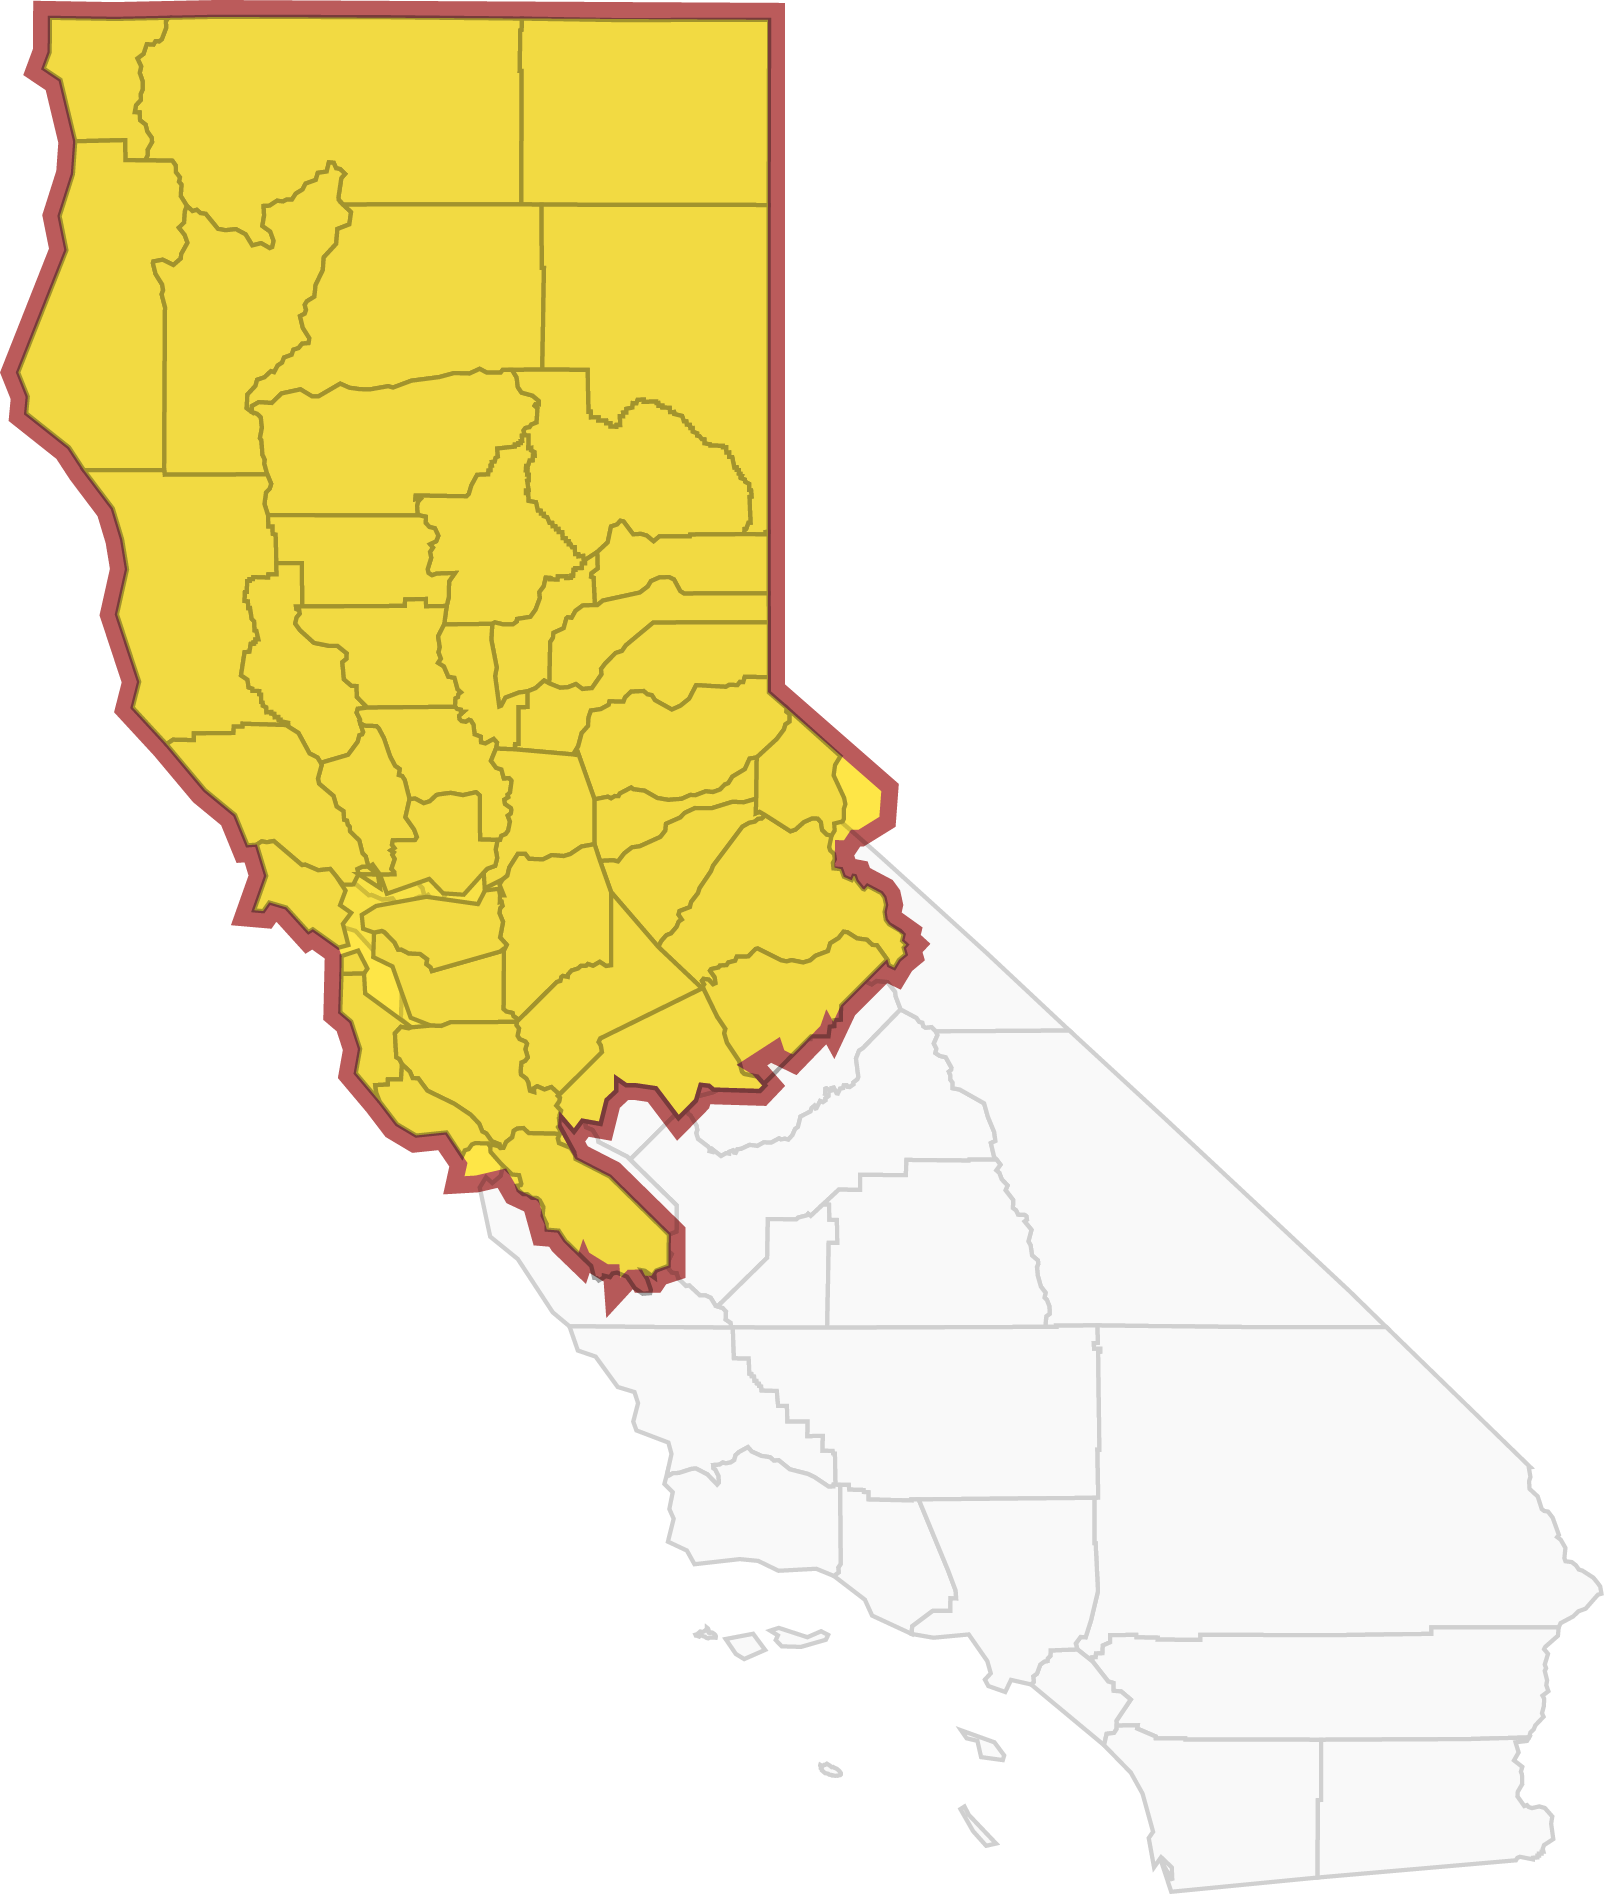 A map of California with the Northern California districts highlighted